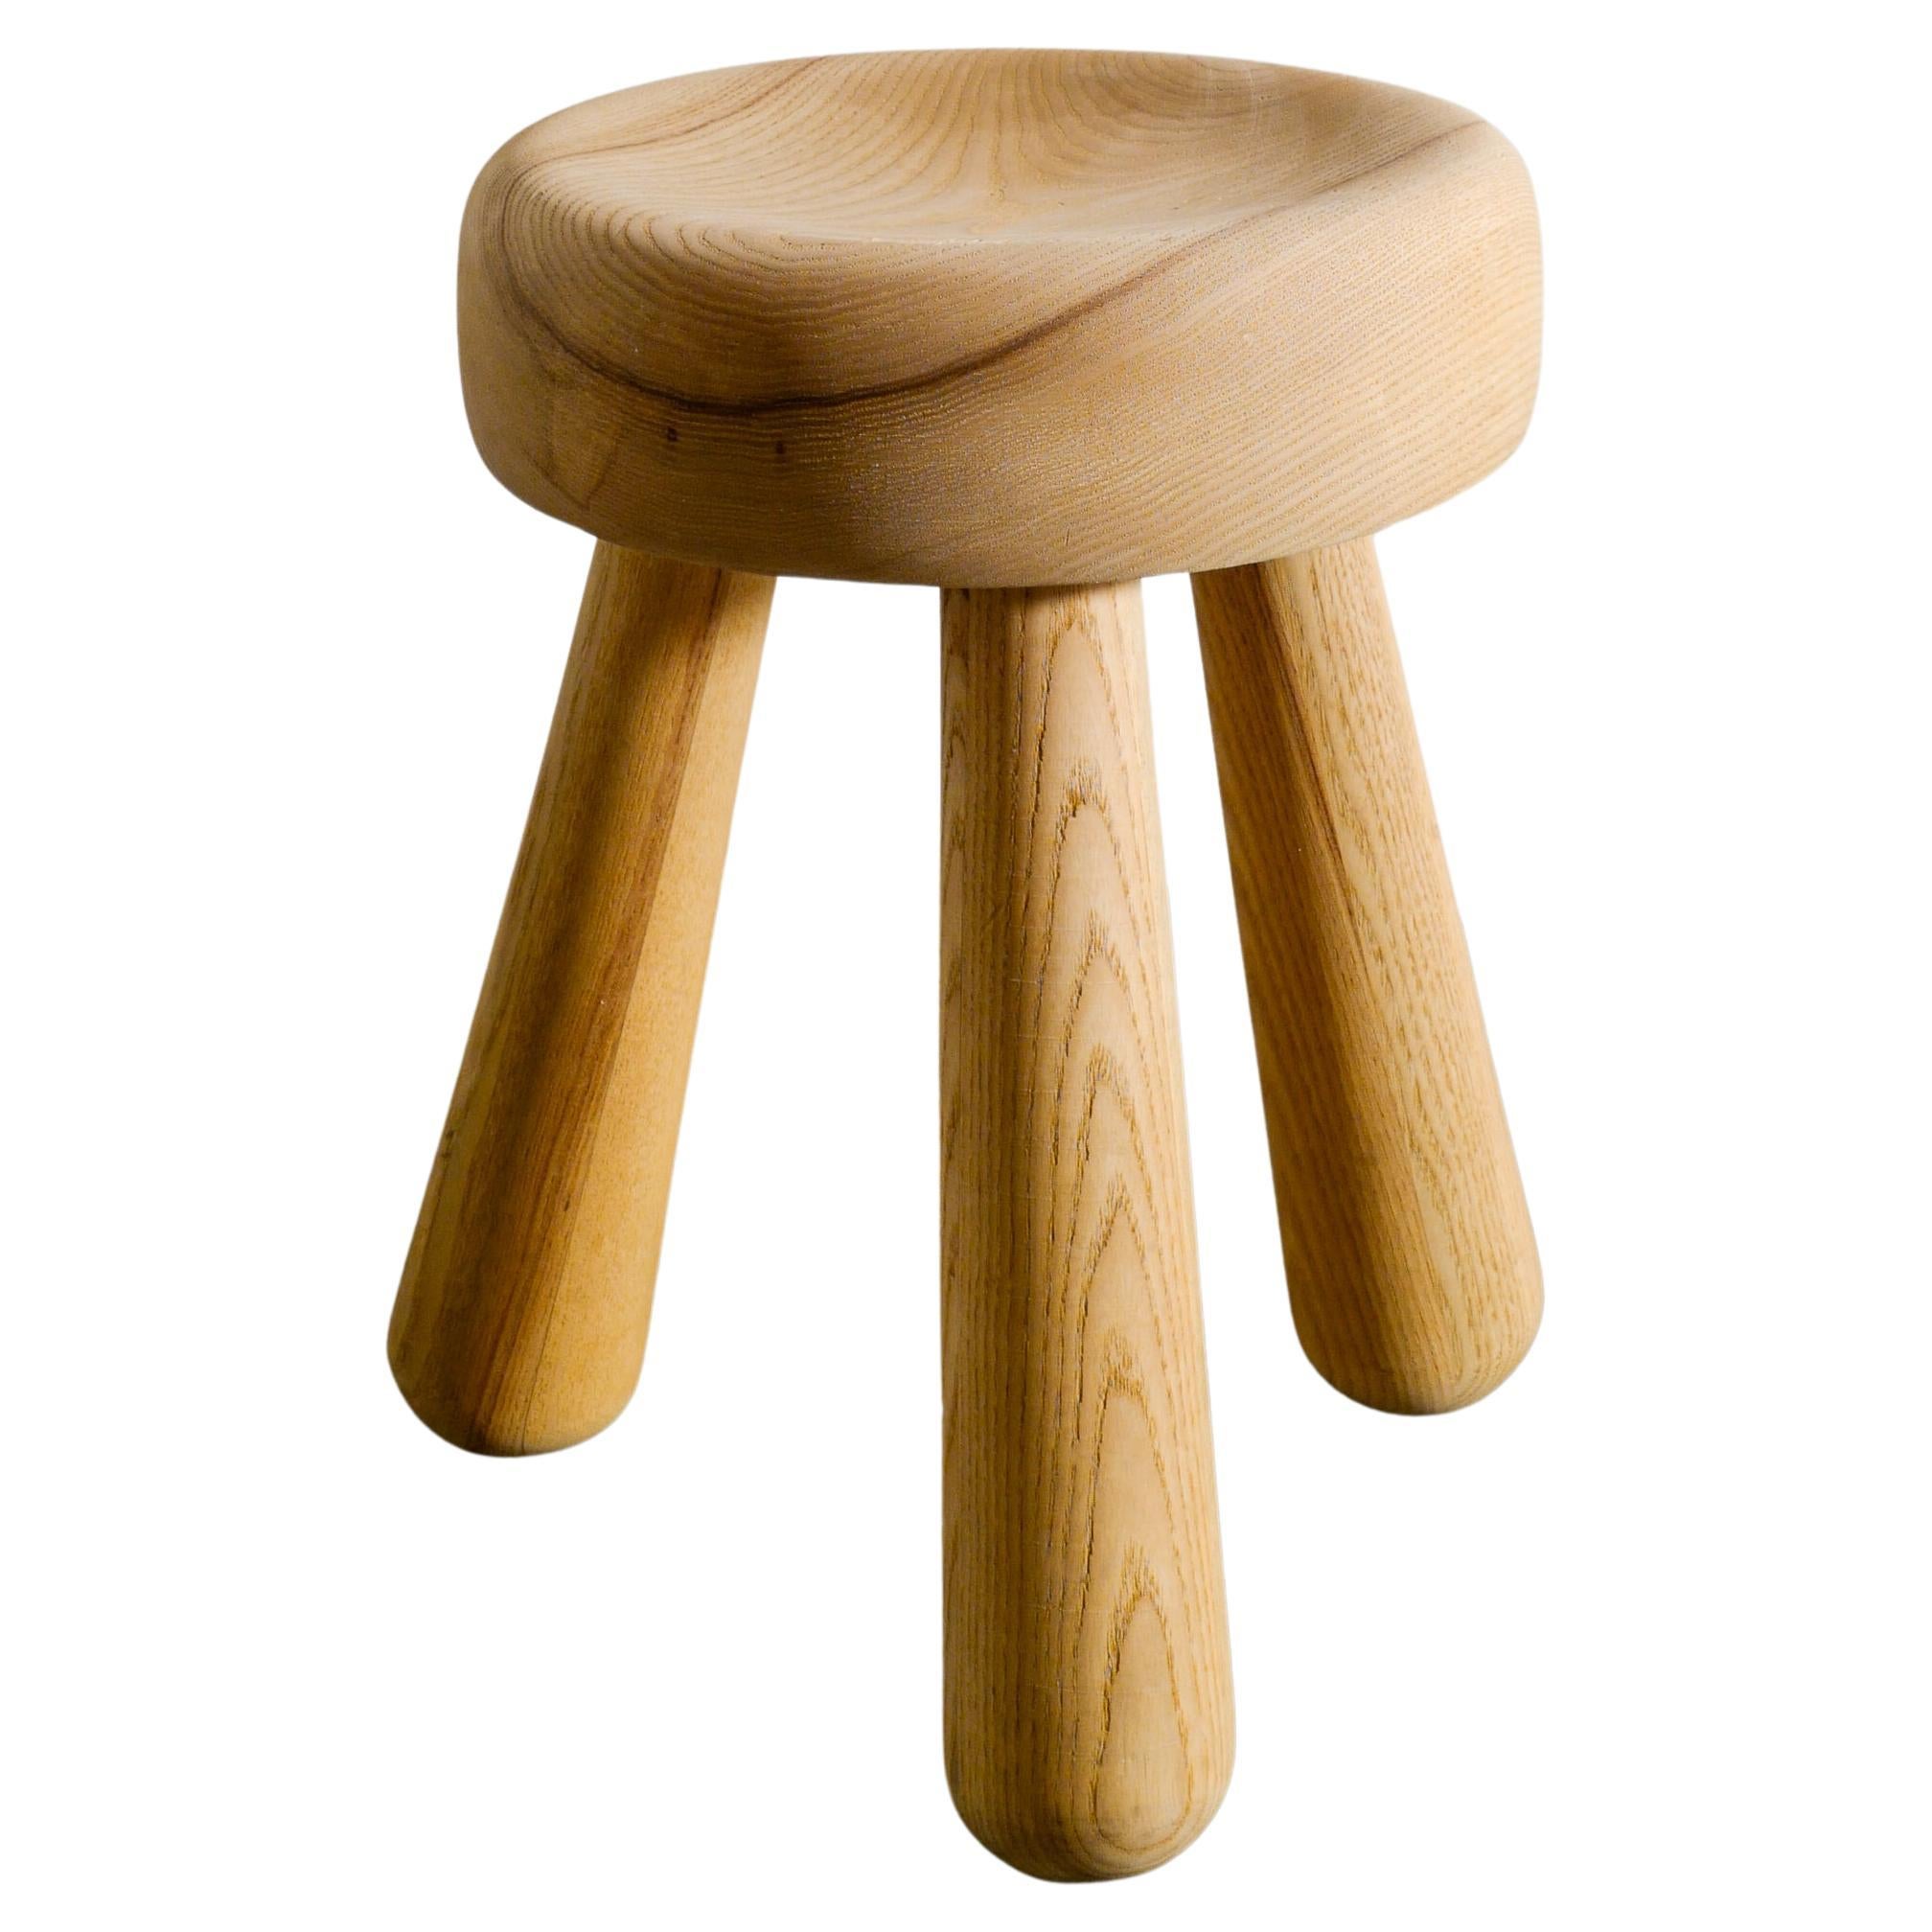 Wooden Low Mid Century Stool in Ash by Ingvar Hildingsson, 1970s